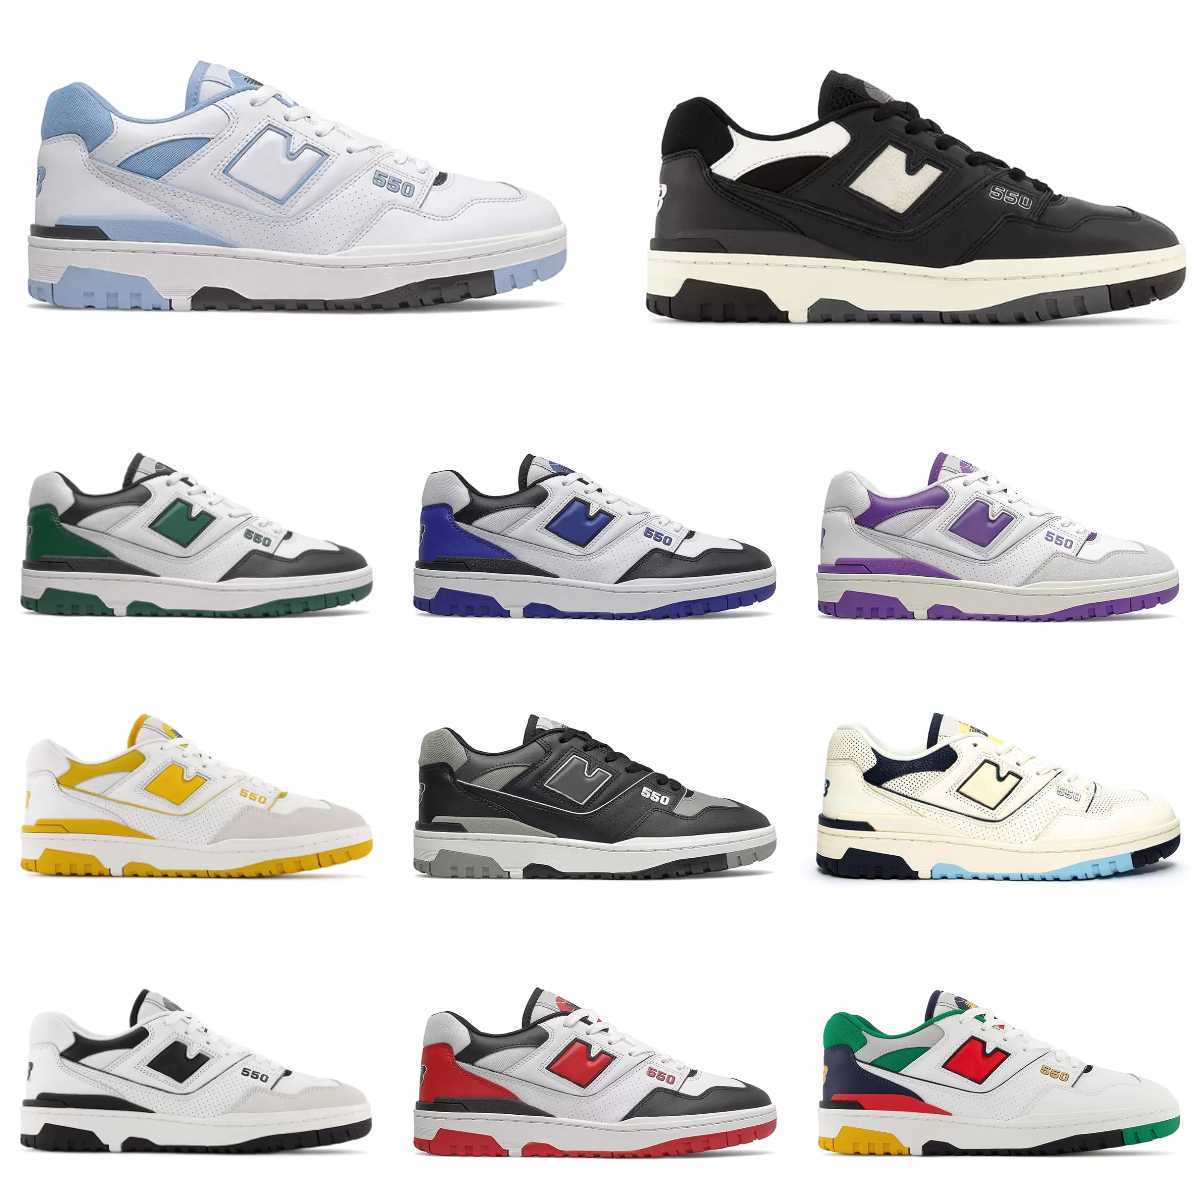 

Sandals New 550 Running Shoes Casual Men Sneakers White Green Black Grey UNC Bb 550s Amongst AURALEE Varsity Gold Shadow Mens Nb Womens Sports Outdoor Niksneakers, Ask the seller about some sizes